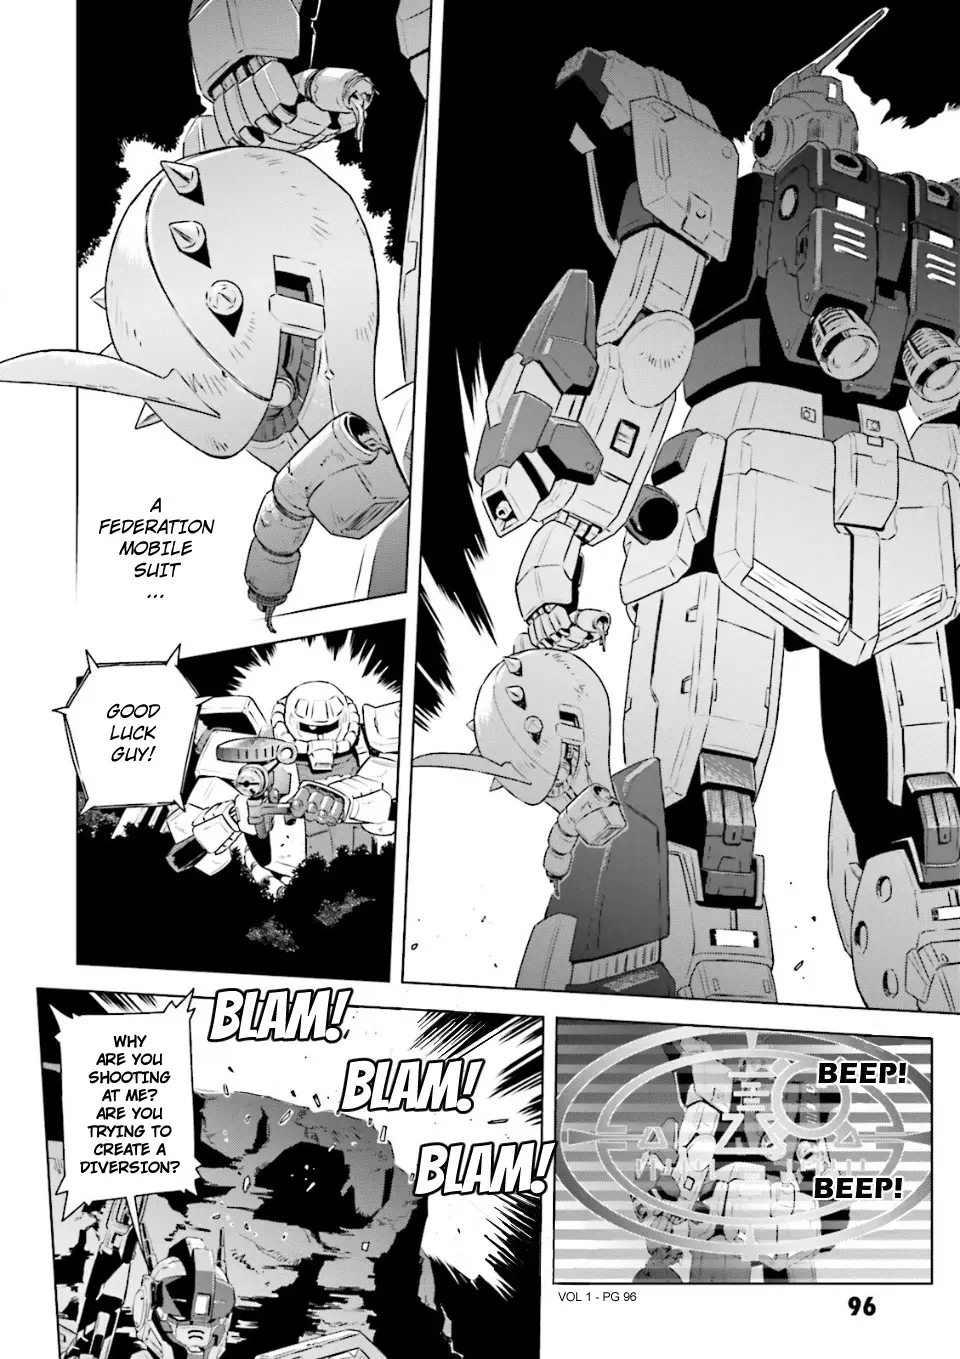 Mobile Suit Gundam Side Story - Missing Link - 4 page 4-3086c751